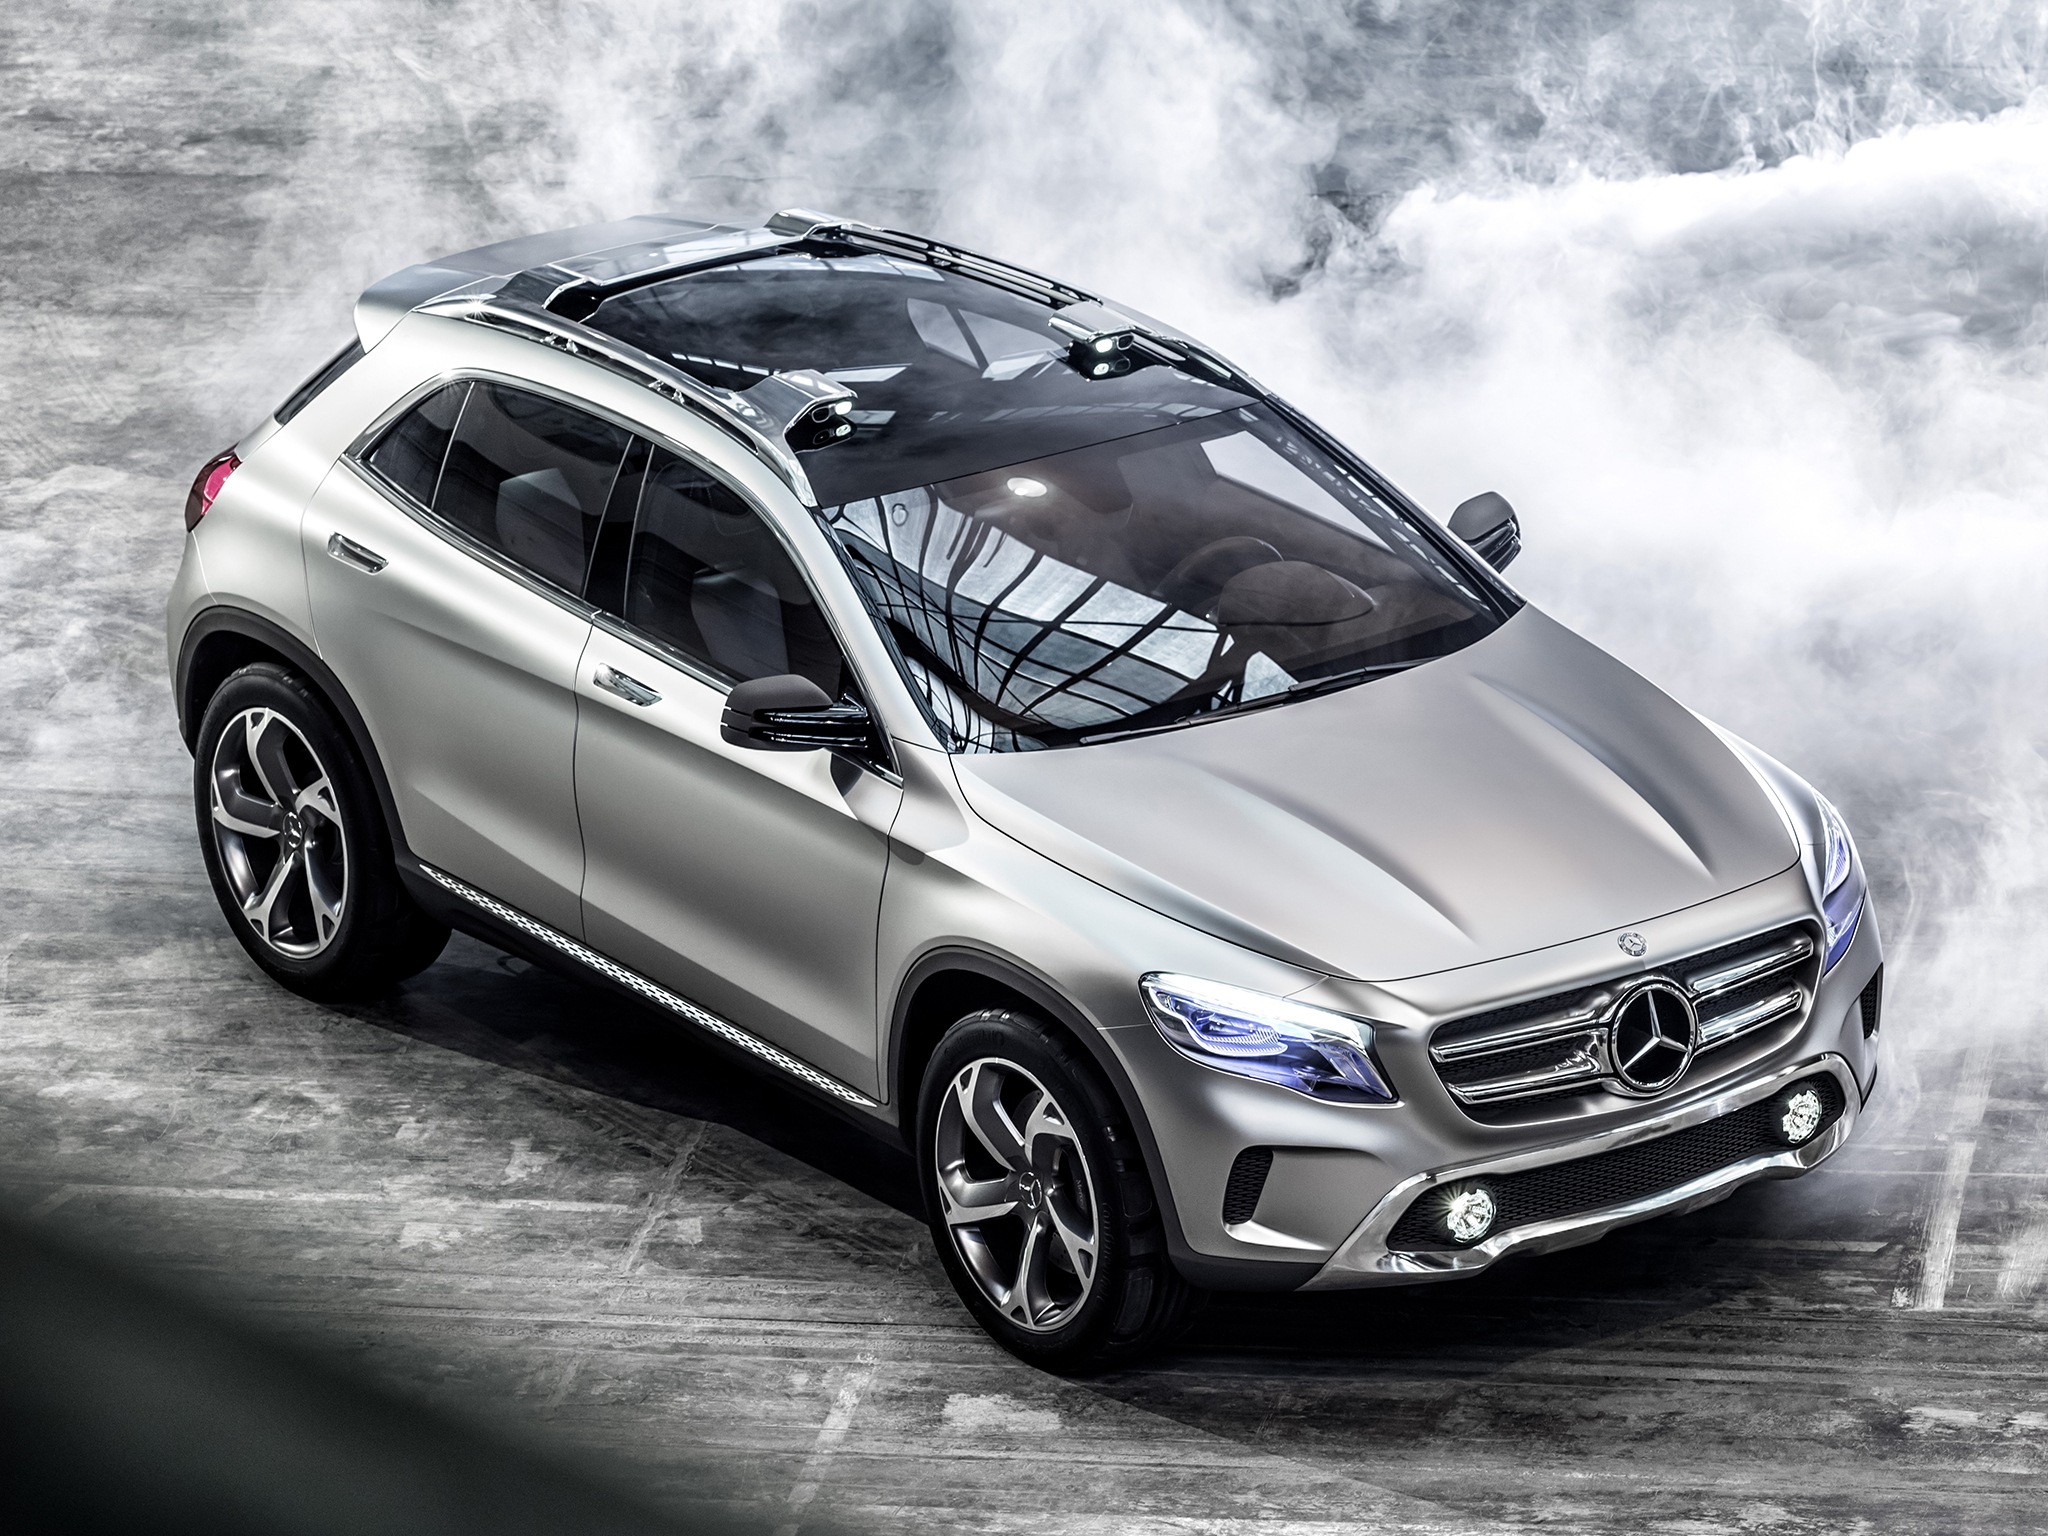 silver, cars, mercedes benz, lights, concept, headlights, silvery, crossover, glk